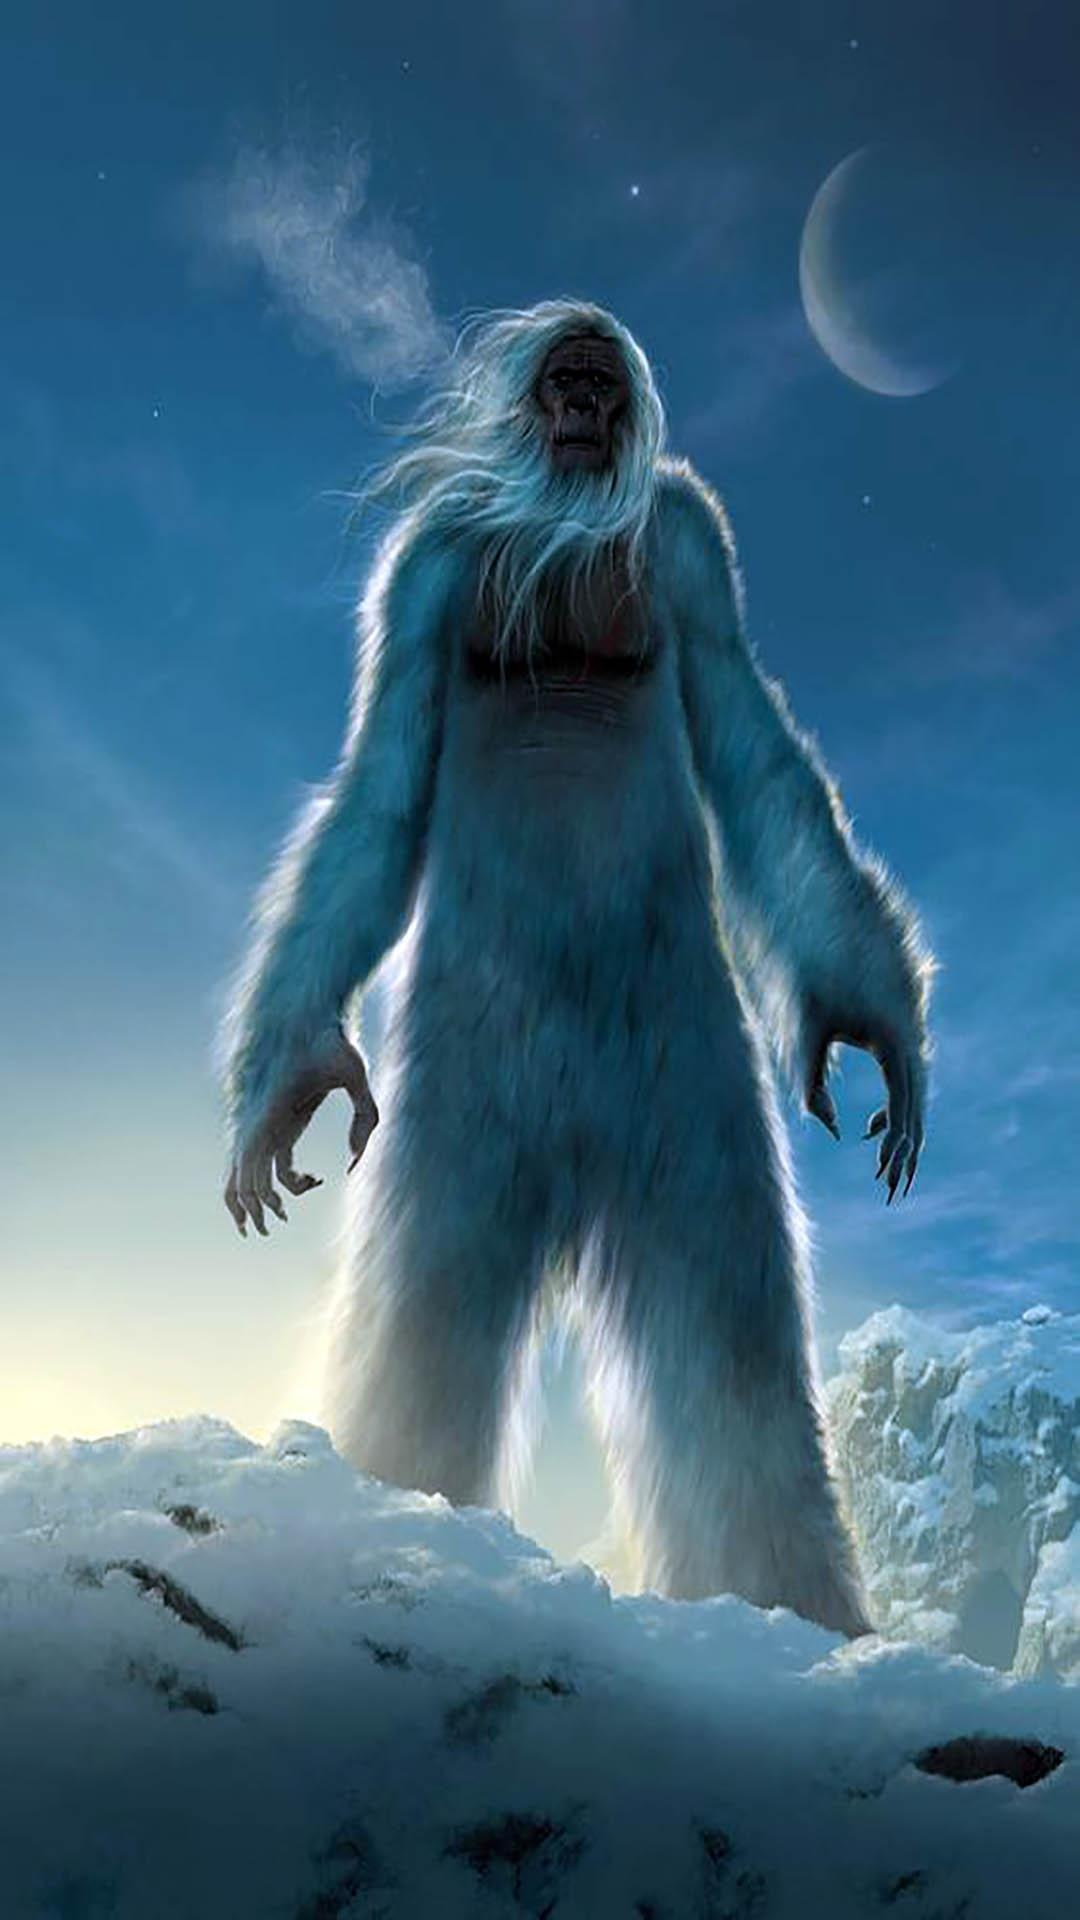 Abominable snowman, Yeti legend, Mythical creature, Mysterious sightings, 1080x1920 Full HD Phone